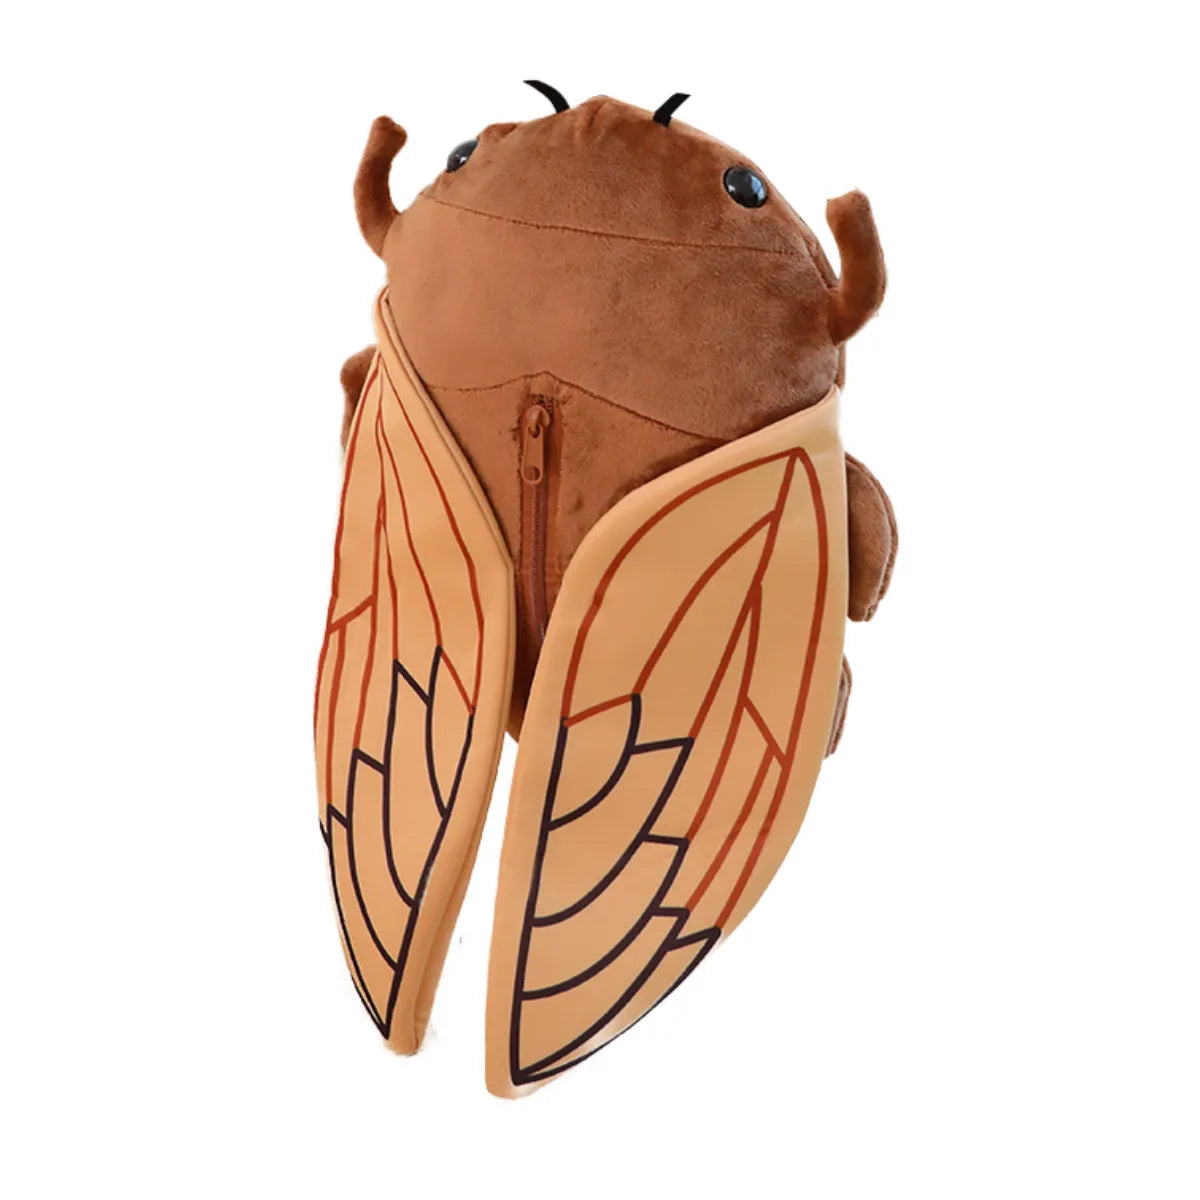 Insect Stuffed Animal Plush Backpack Toy for Kids,(17")